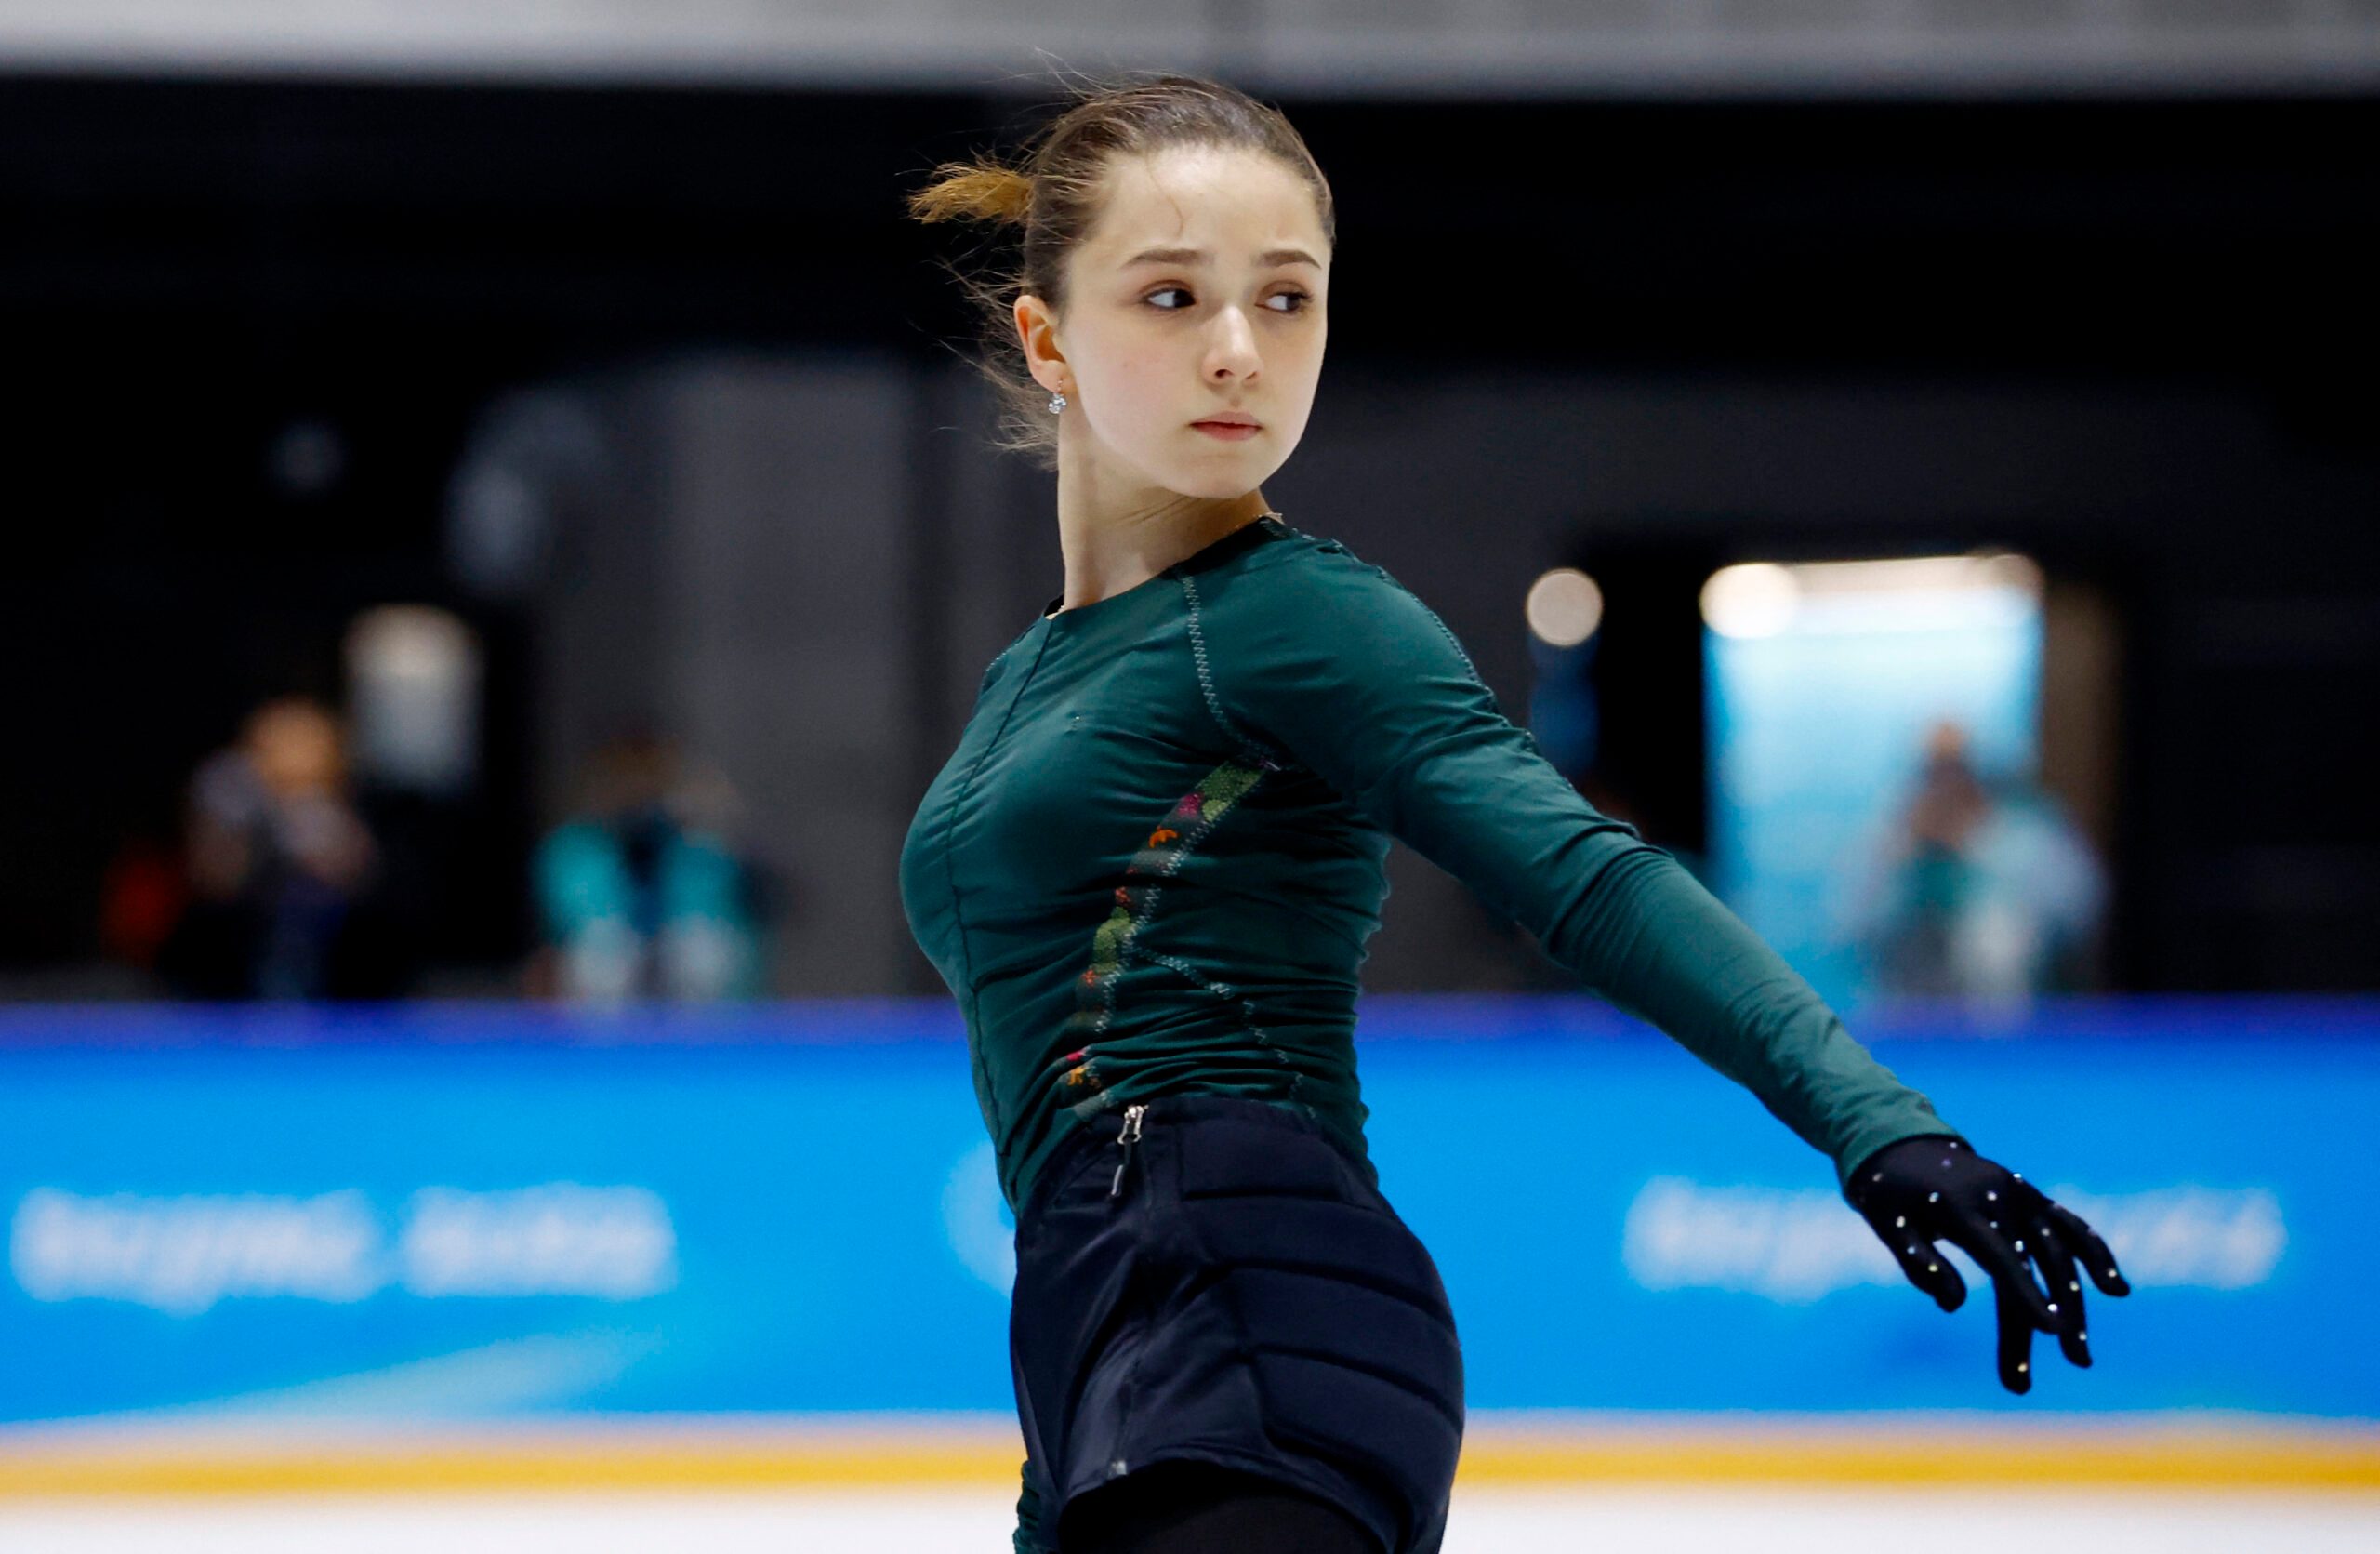 Russian Valieva takes the ice after being cleared to compete